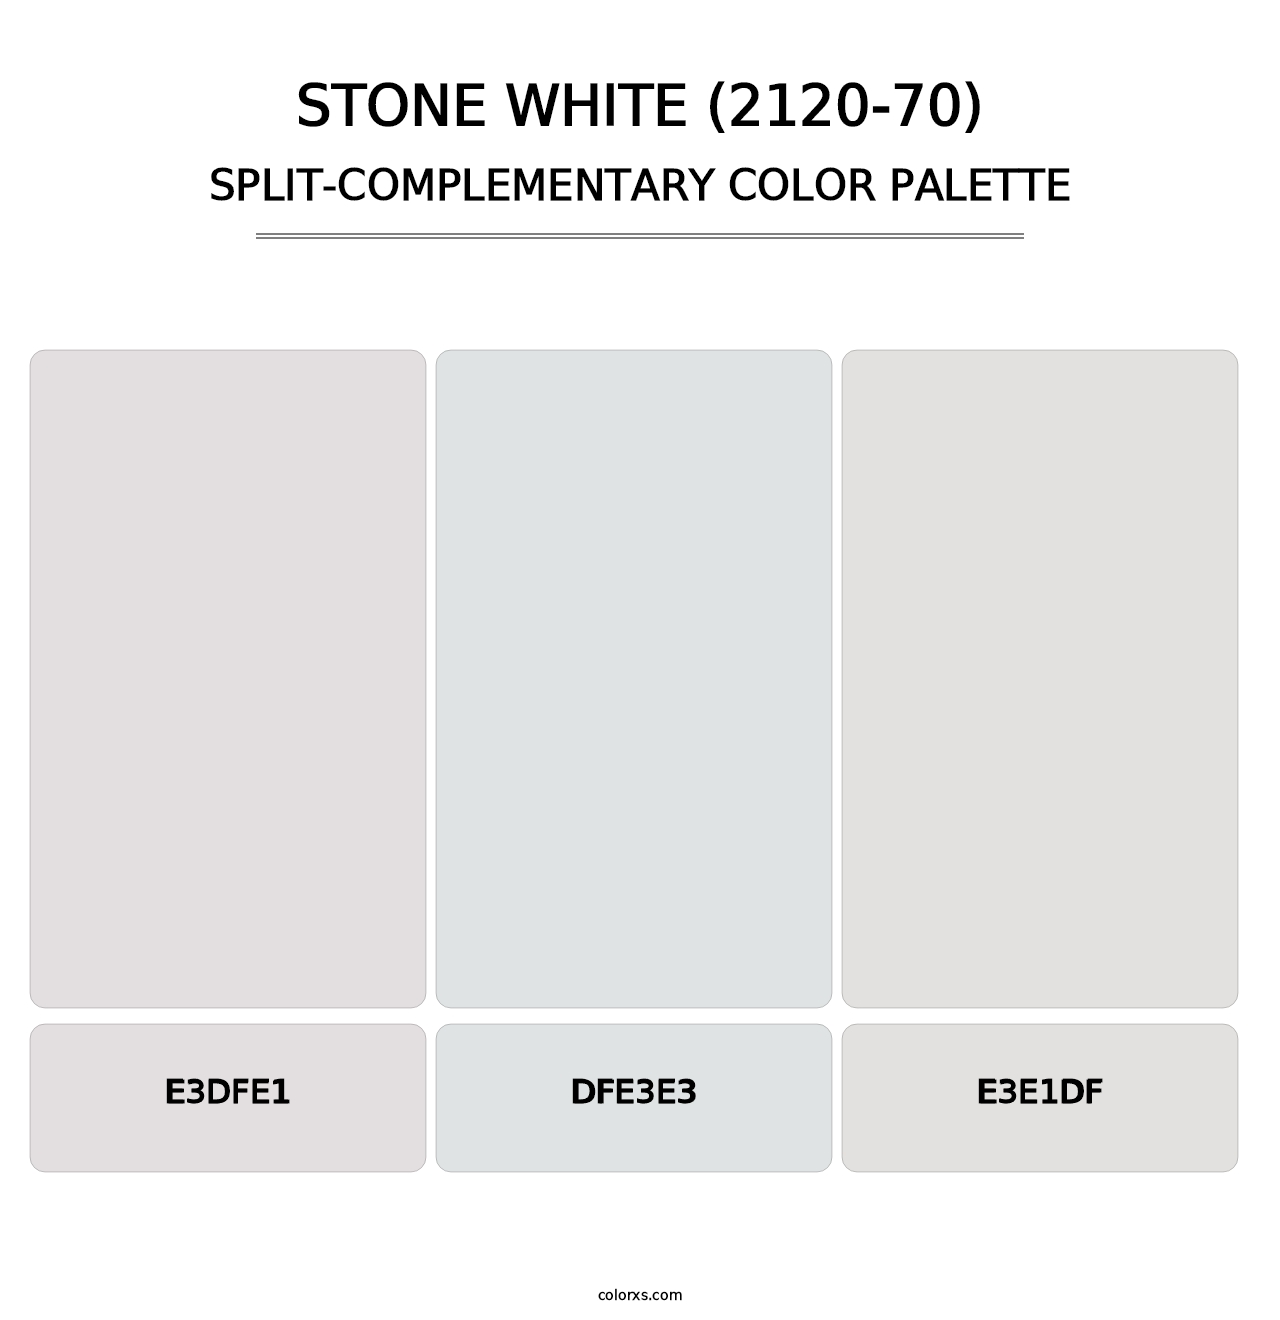 Stone White (2120-70) - Split-Complementary Color Palette